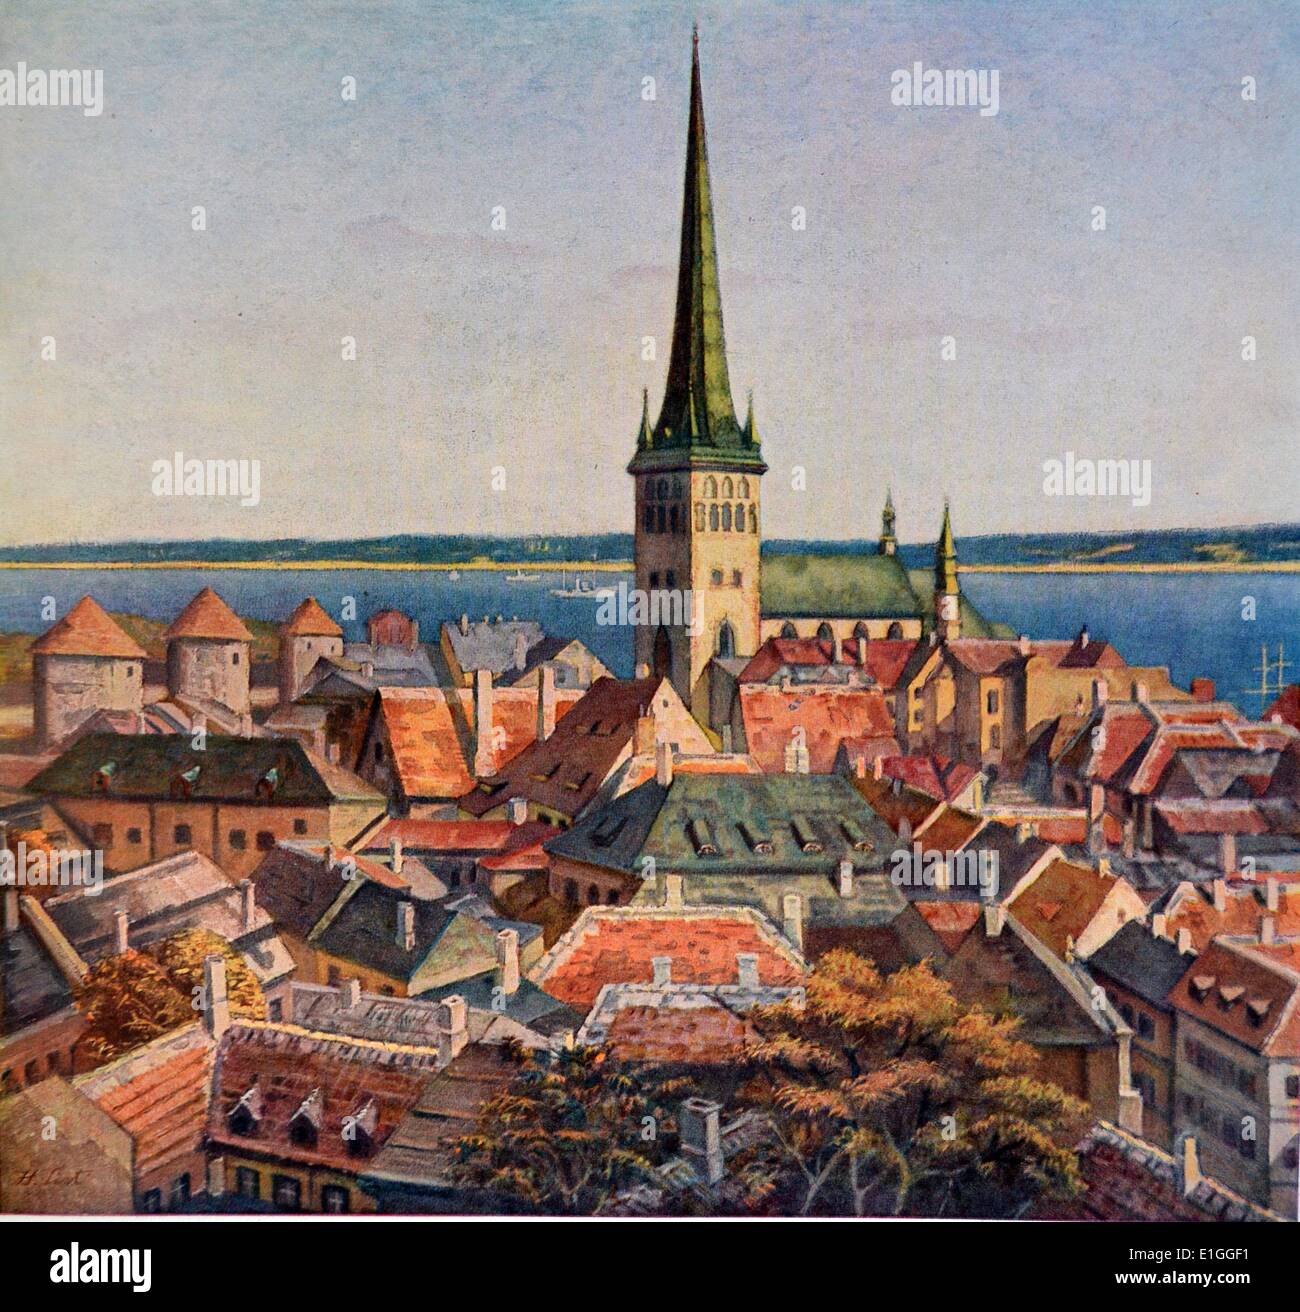 Reval'  by Hans list. Tallinn the capital of Estonia. The city was known as Reval during the Nazi invasion of Estonia from 1941 to 1944. Published in 'Die Kunst im deutschen Reich' (Art in the German Reich) was first published in January 1937 by Gauleiter Adolf Wagnerand later issued under the direction Adolf Hitler himself. Stock Photo